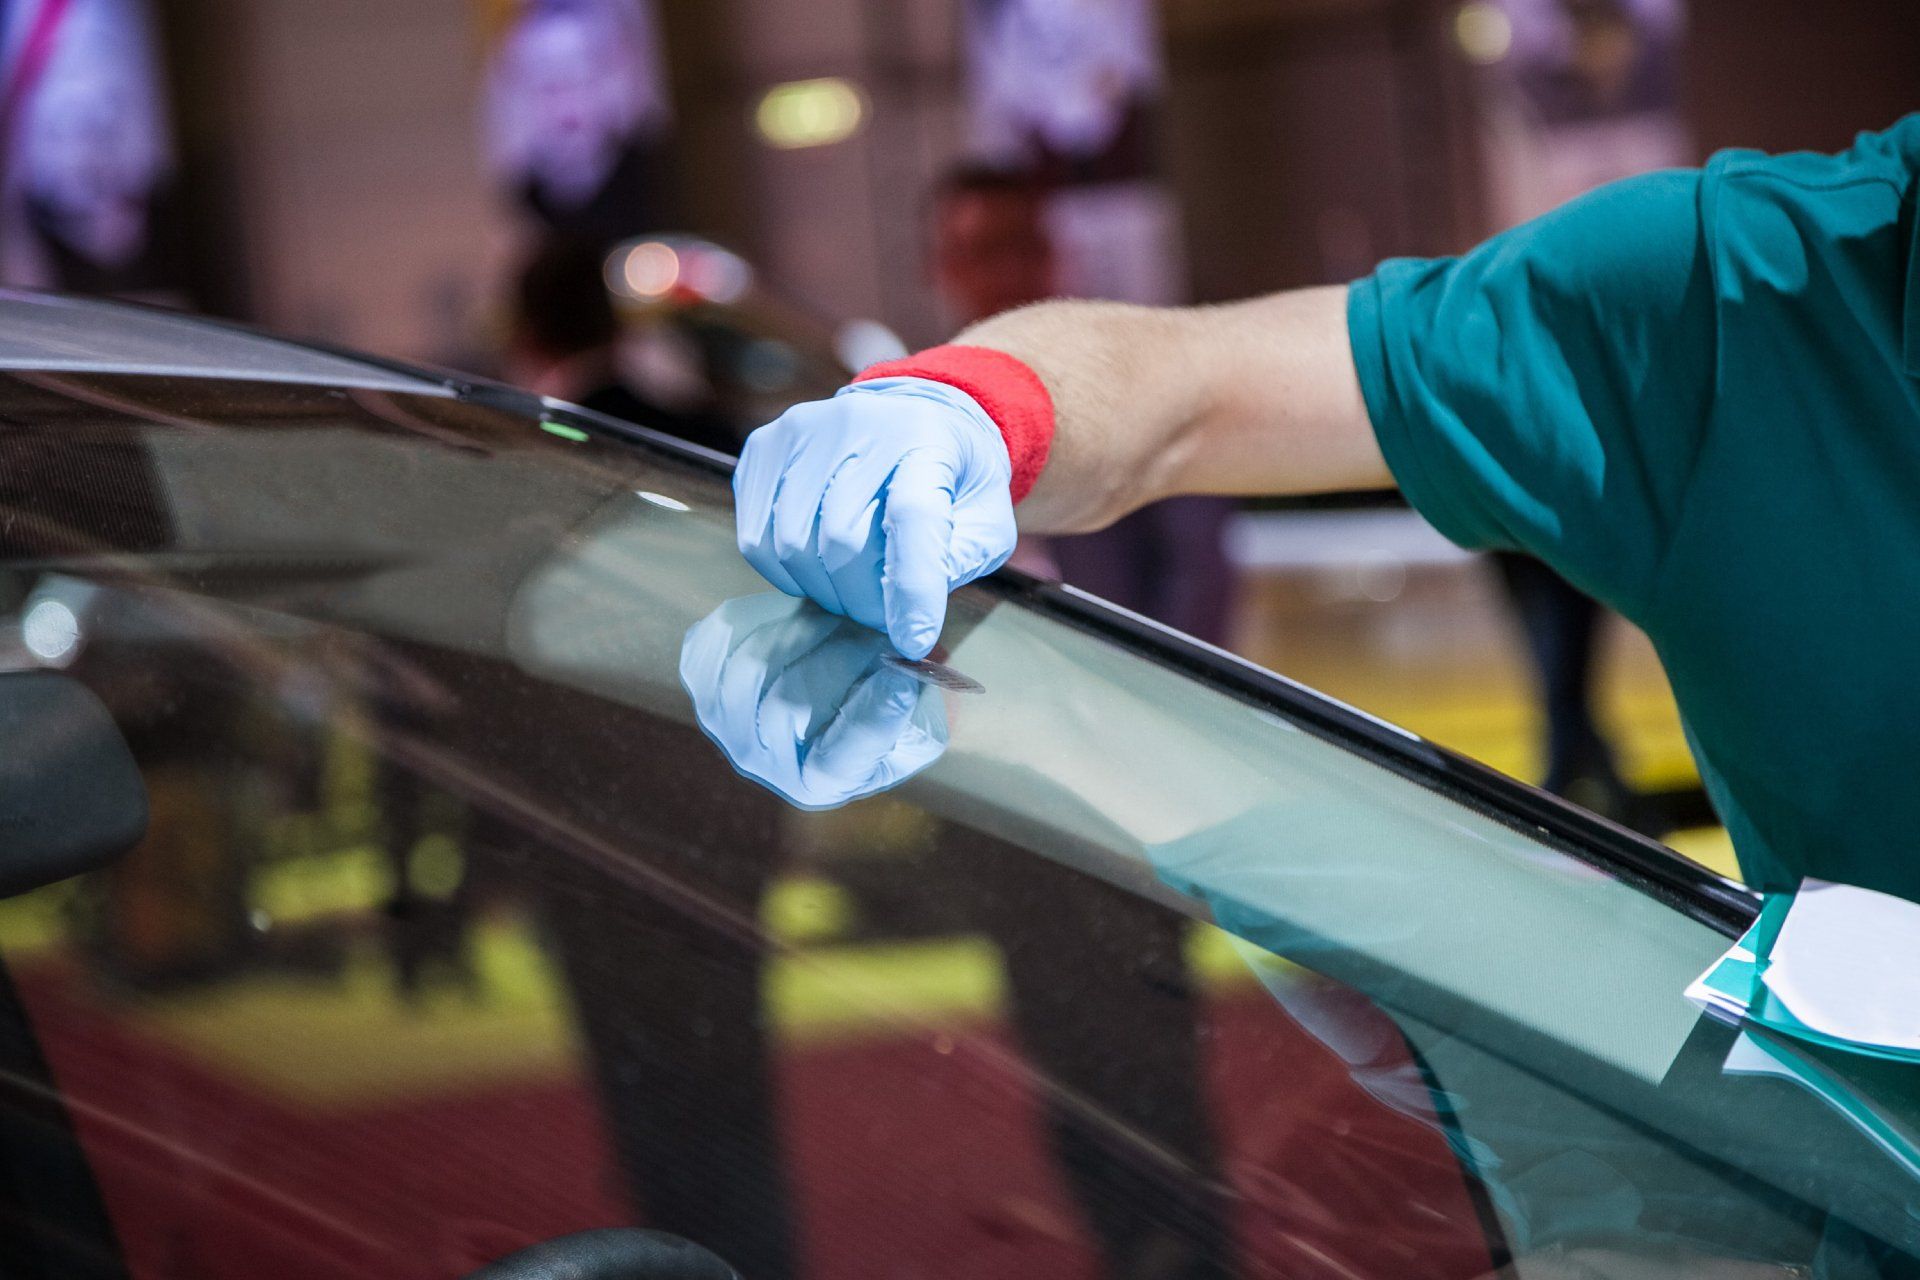 windshield - glass replacement and repair services in Richmond, VA